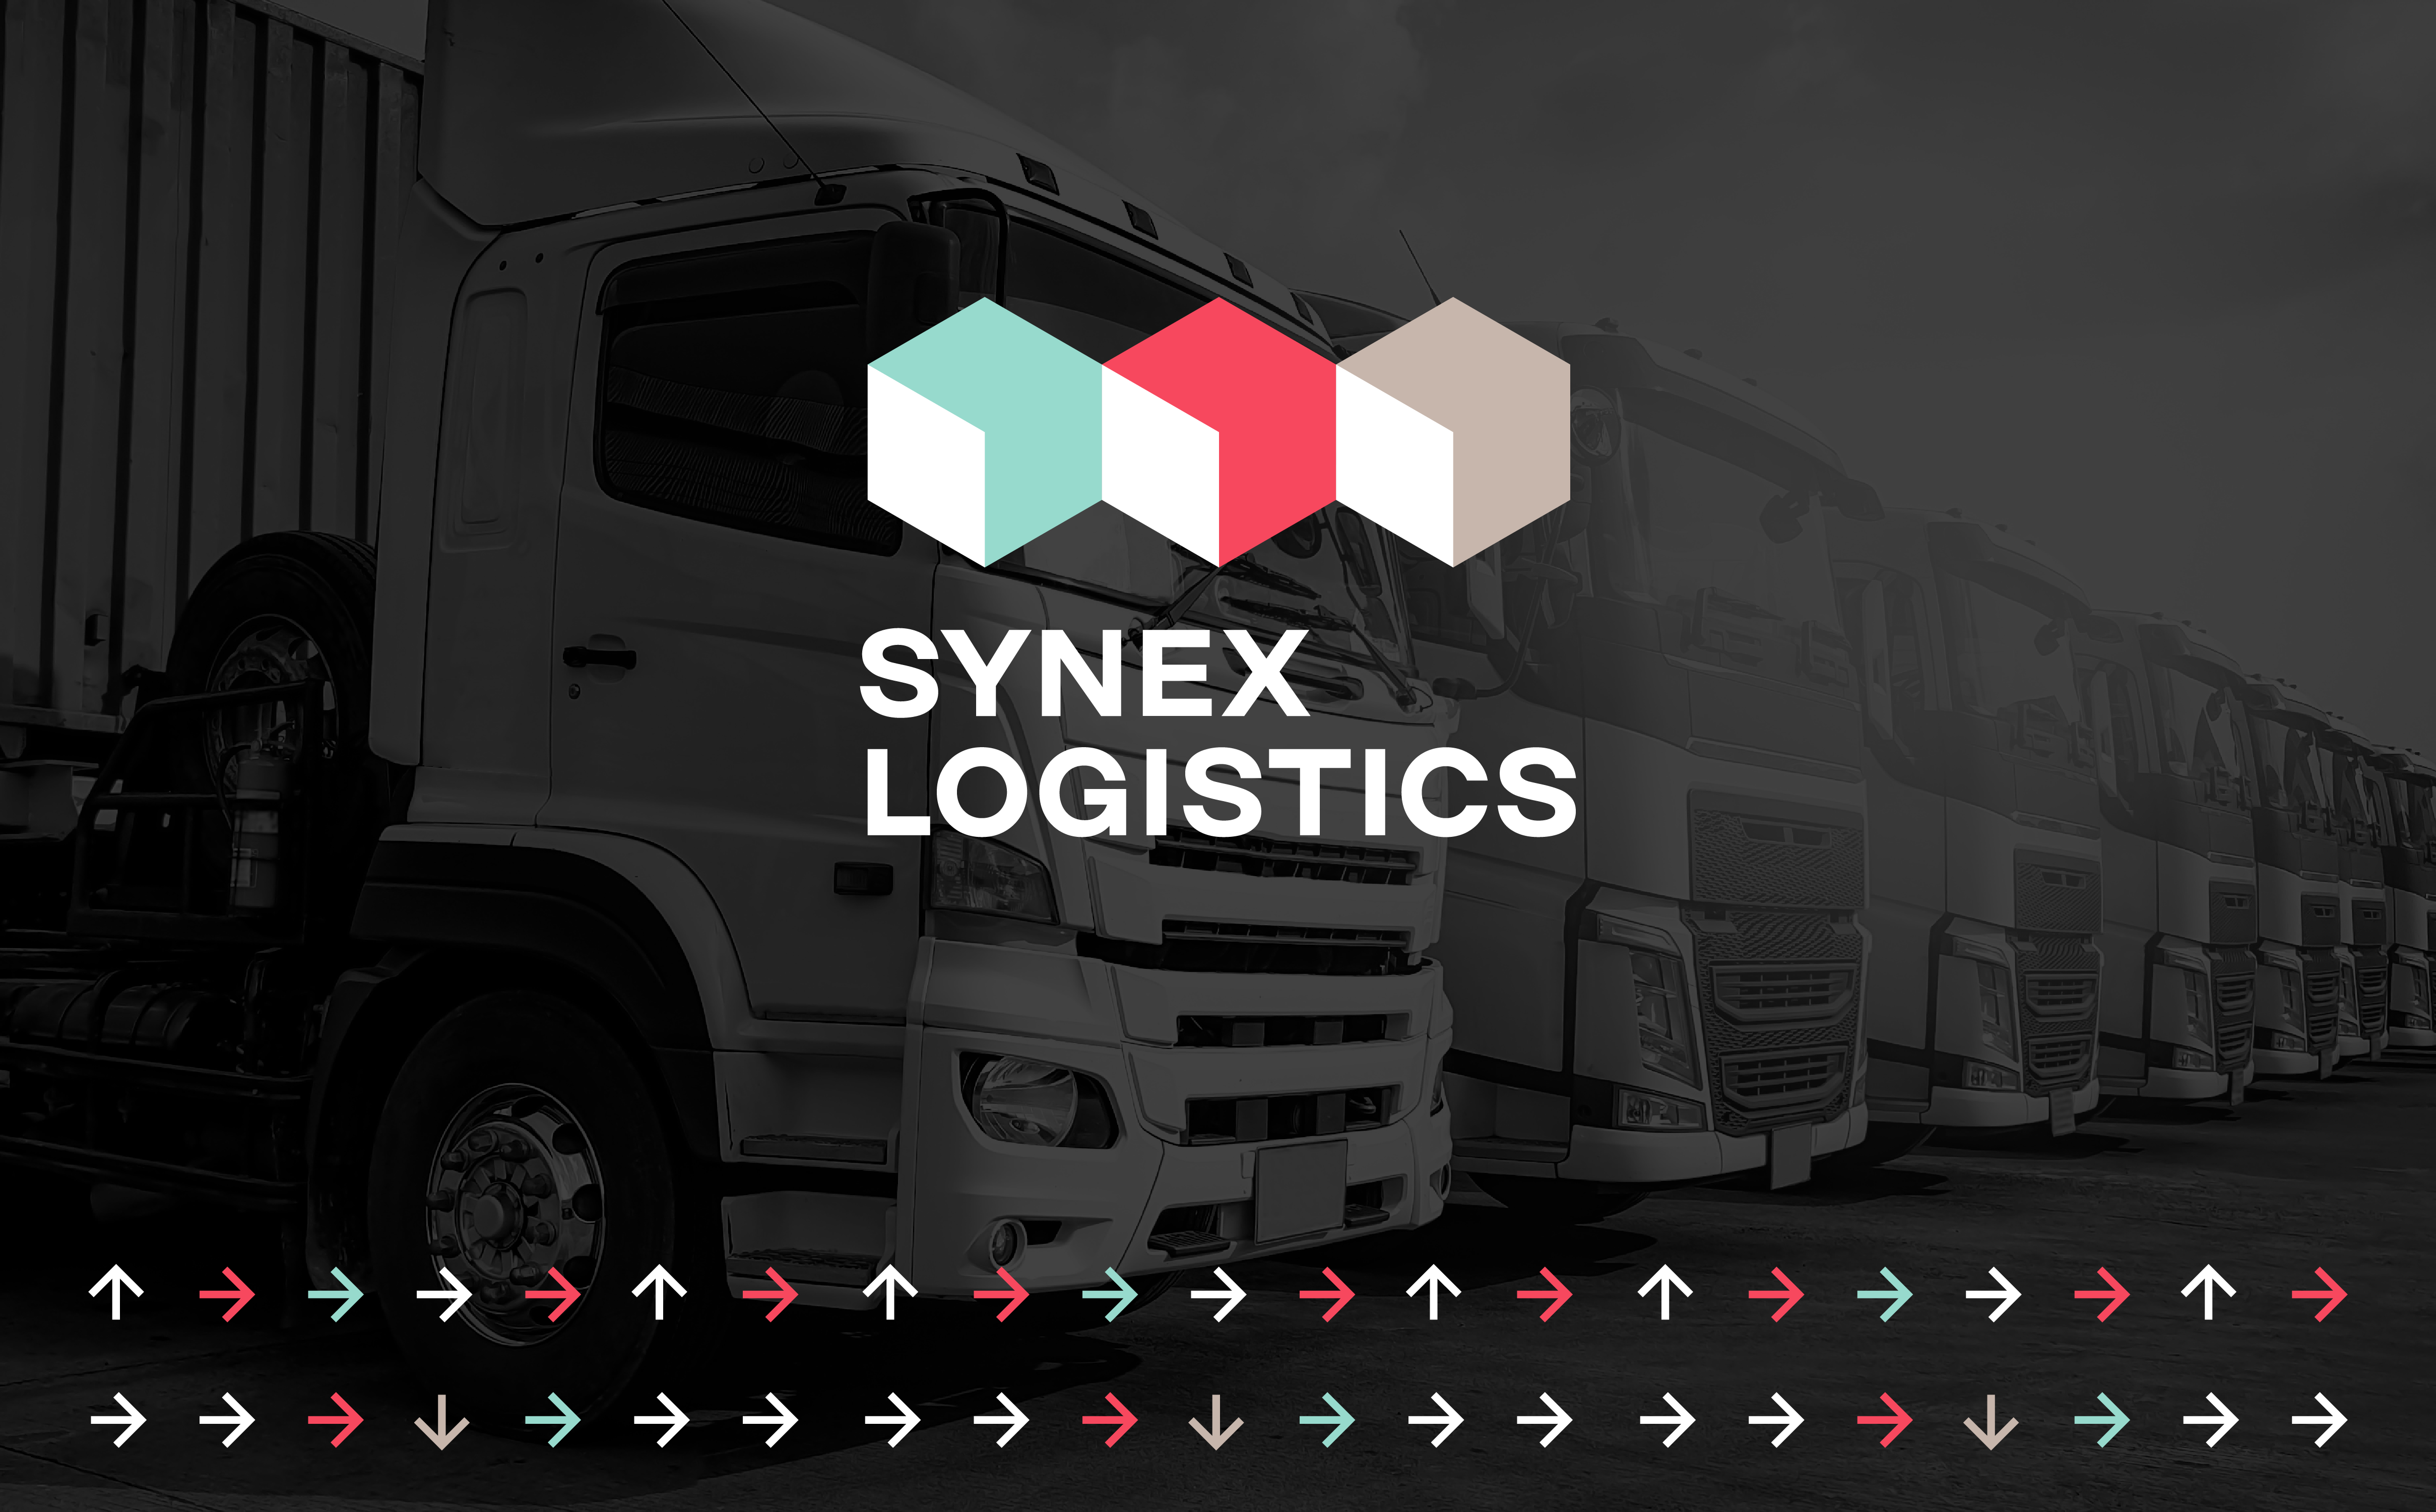 SYNEX Logistics: A New Company With 13 Years of Expertise